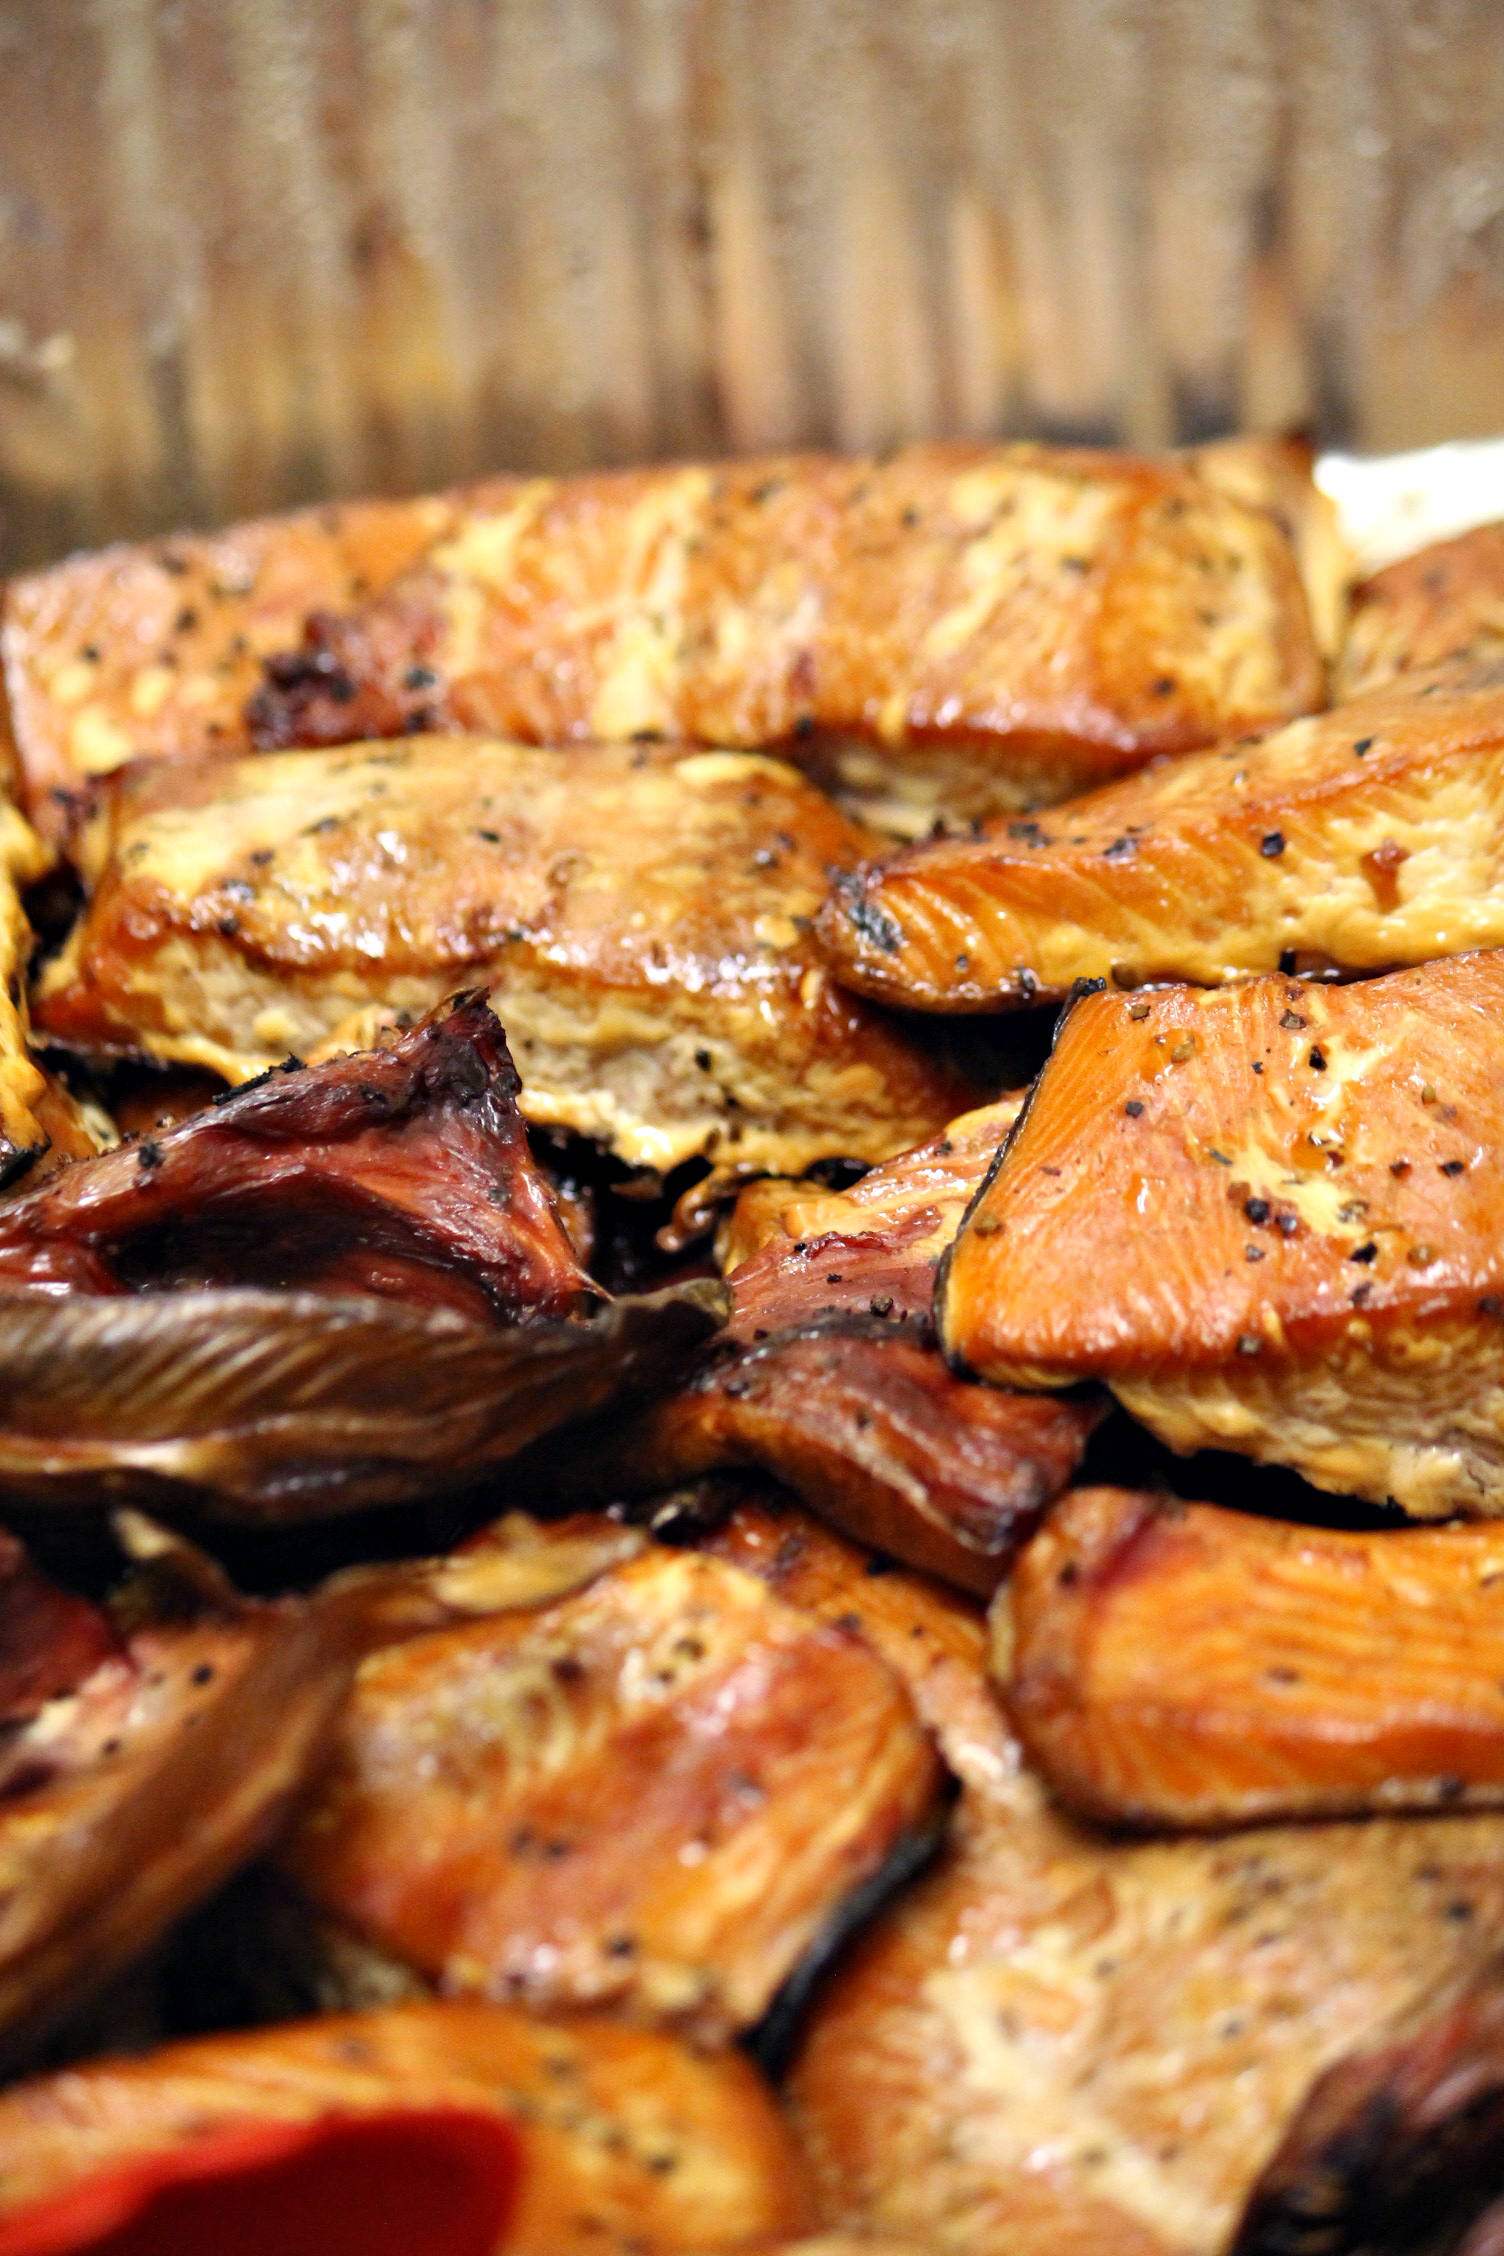 NWIC event served grilled salmon caught by Lummi fishermen at family engagement event.